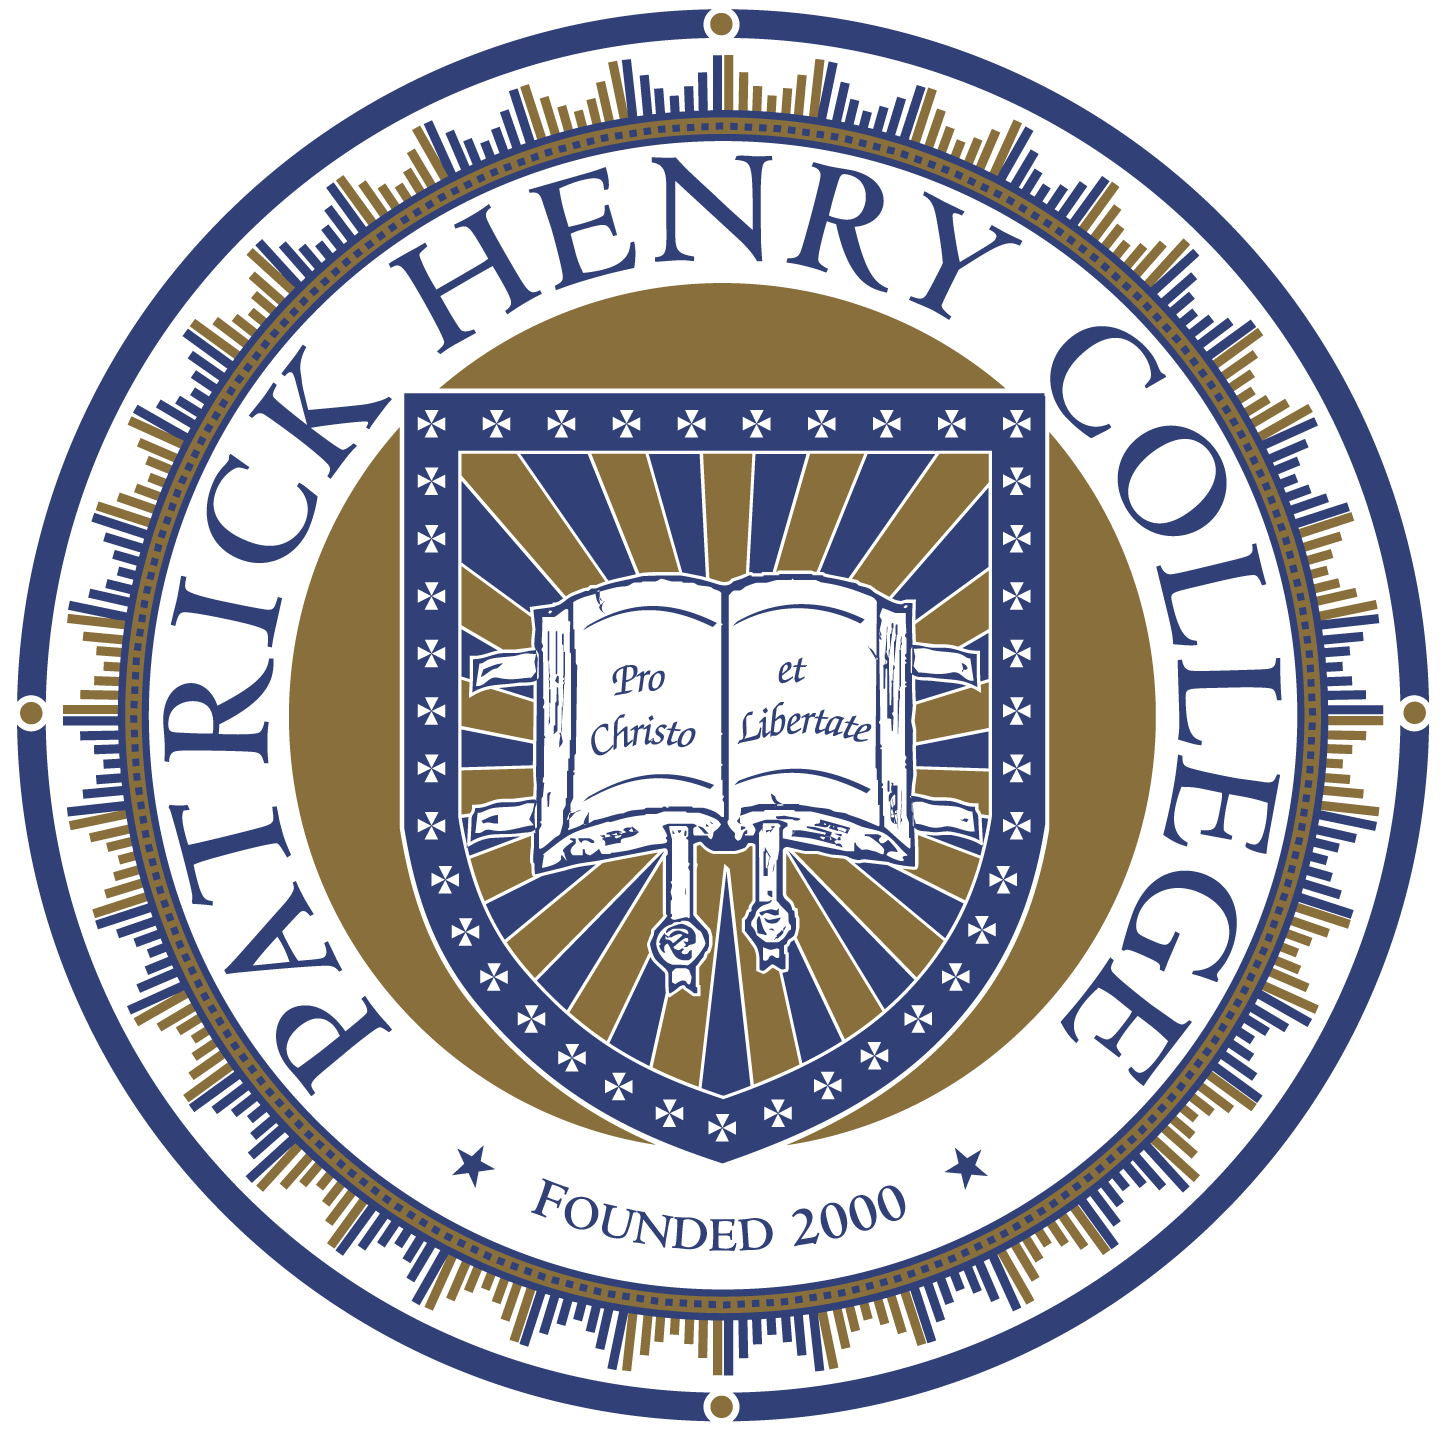 Patrick Henry College Earns "A" Rating from the American Council of Trustees and Alumni (ACTA)